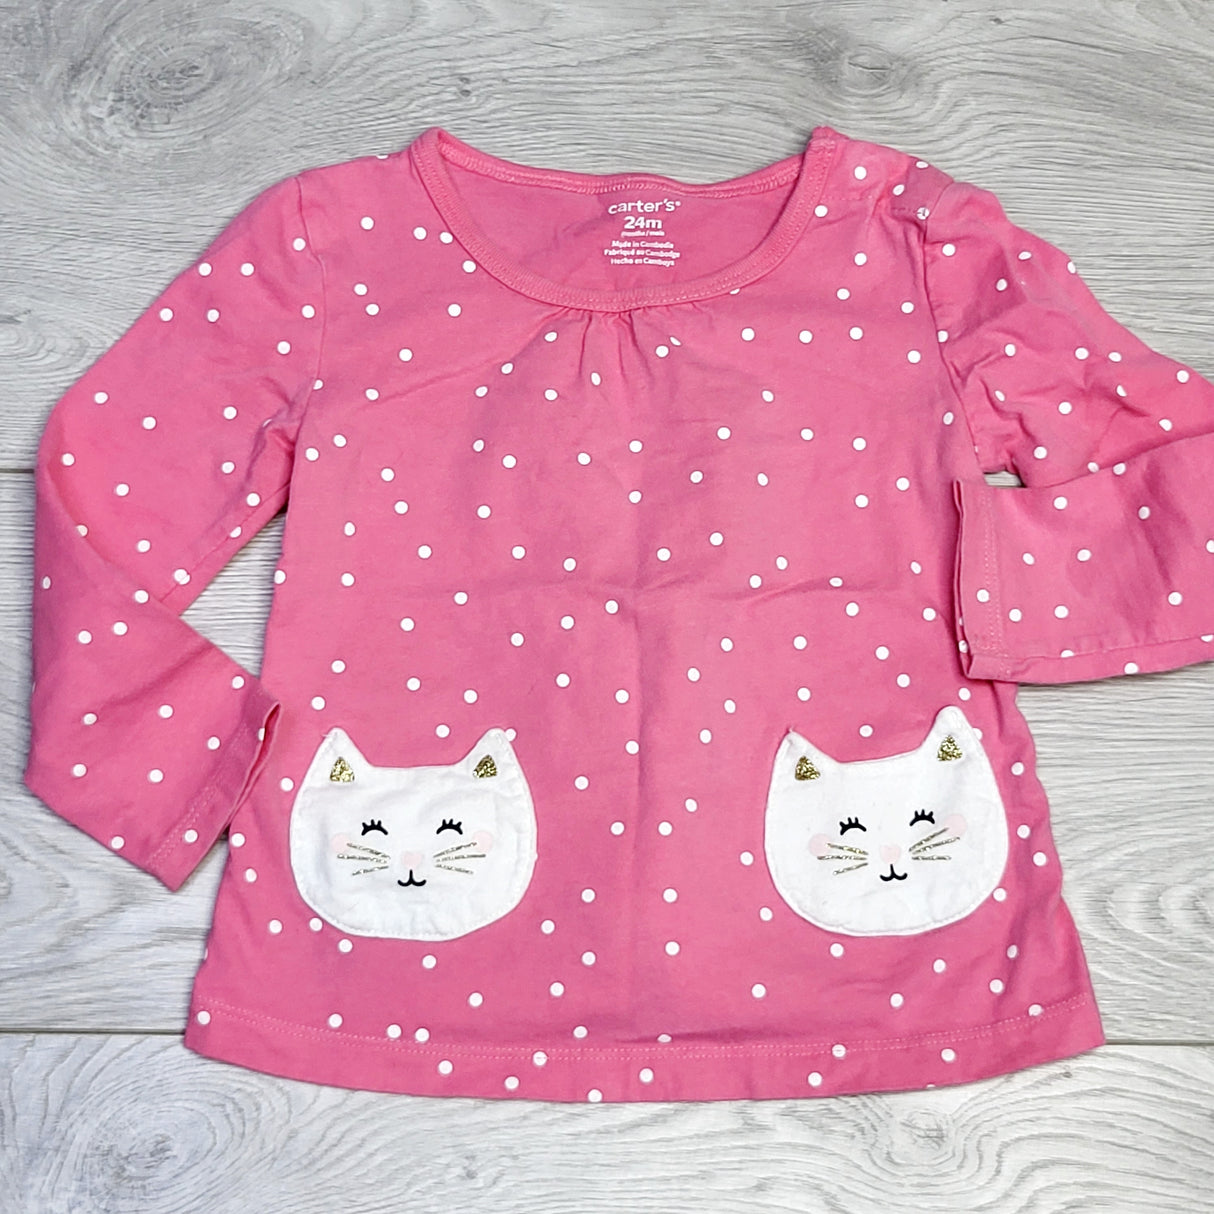 KJHN2 - Carters pink polka dot tunic with cats. Size 24 months